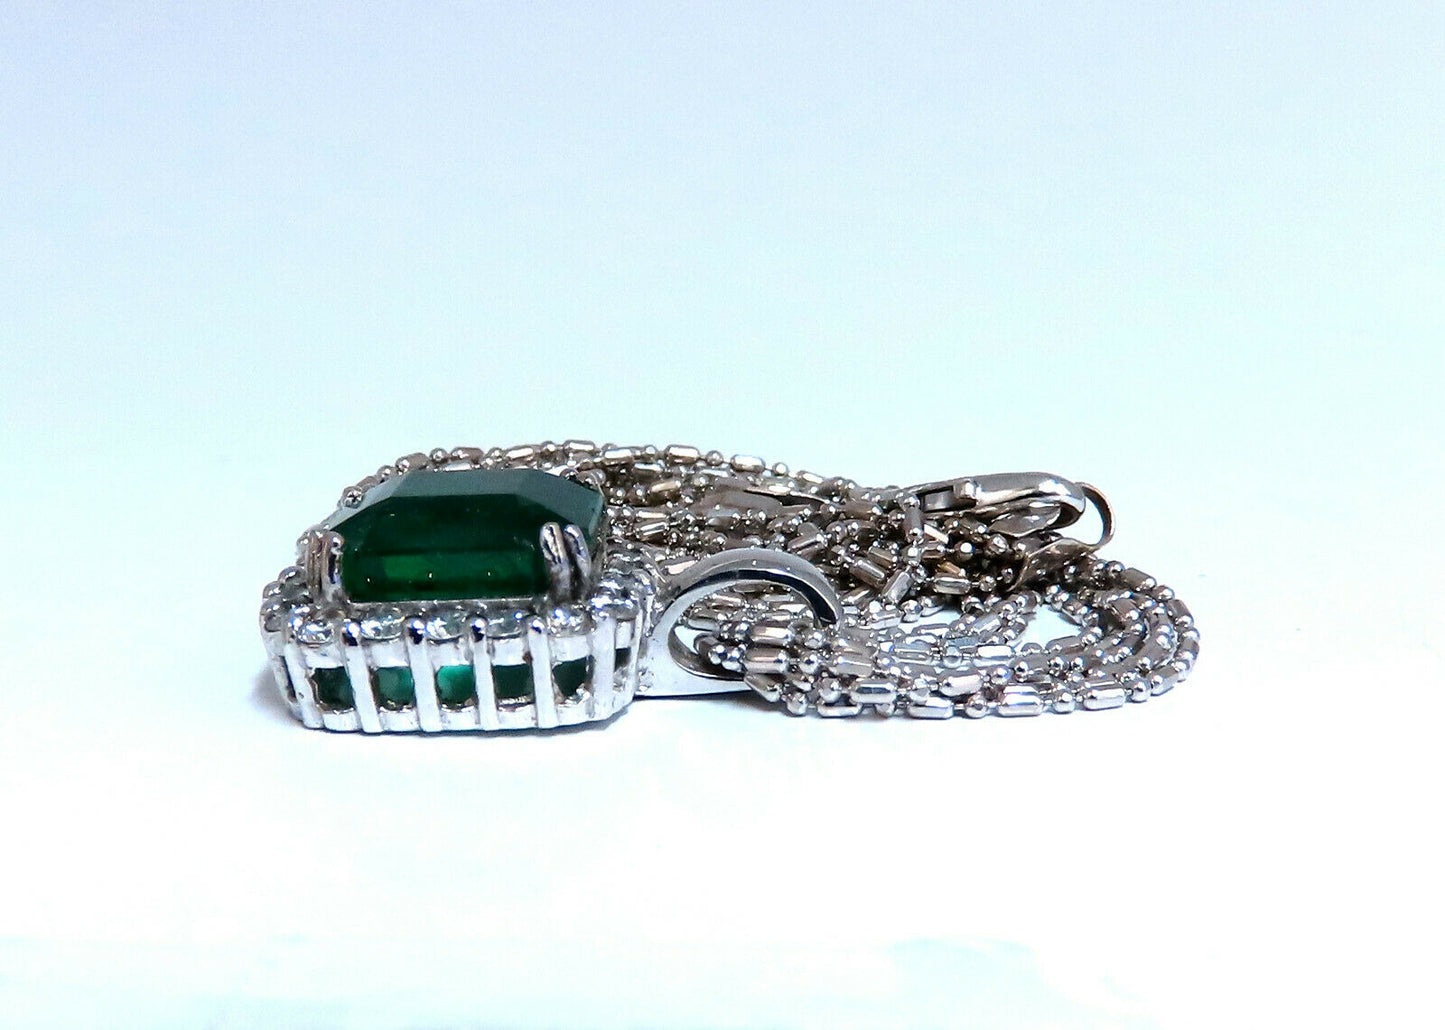 GIA Certified 5.95ct Natural Emerald Diamond Necklace 14kt